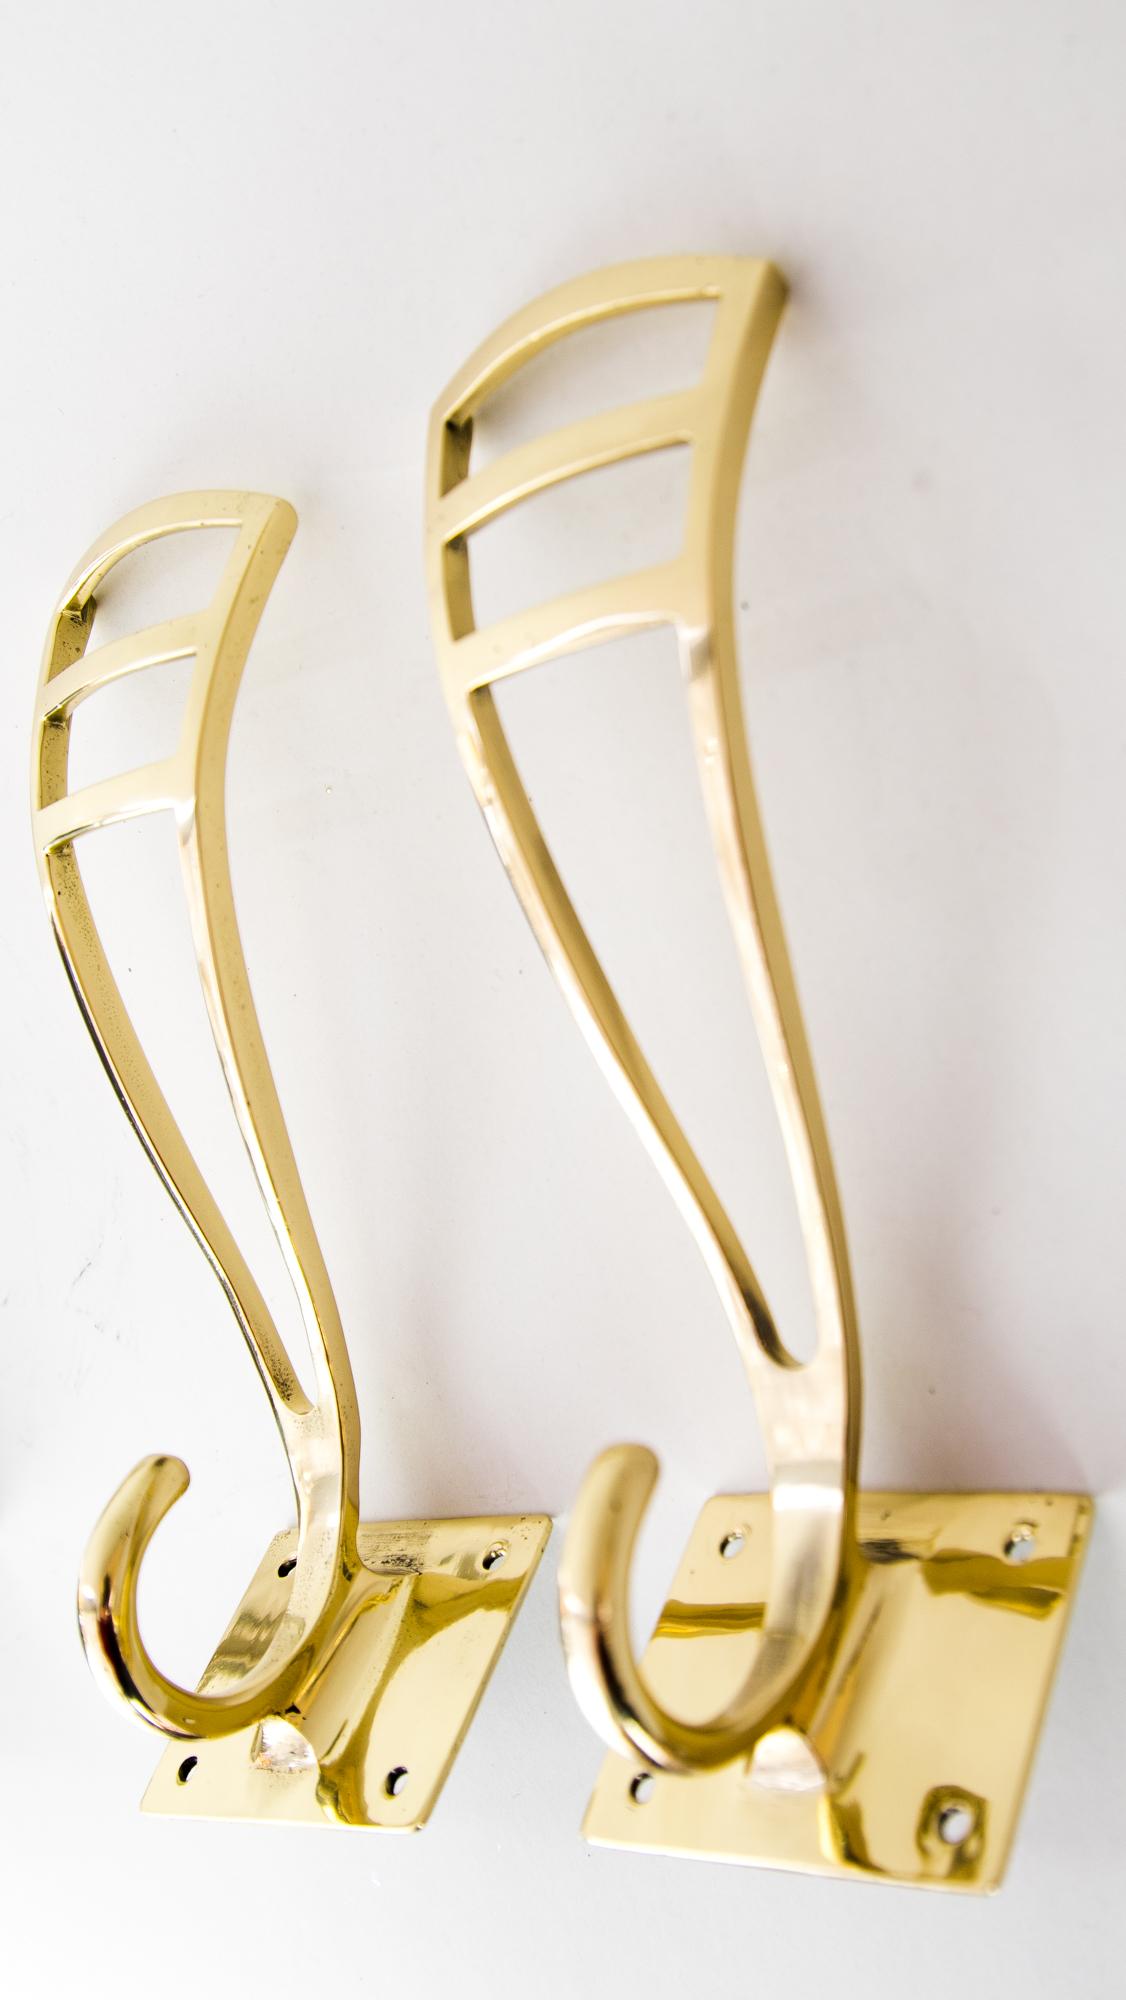 Lacquered Two Art Deco Wall Hooks Nickel-Plated, Vienna, circa 1920s